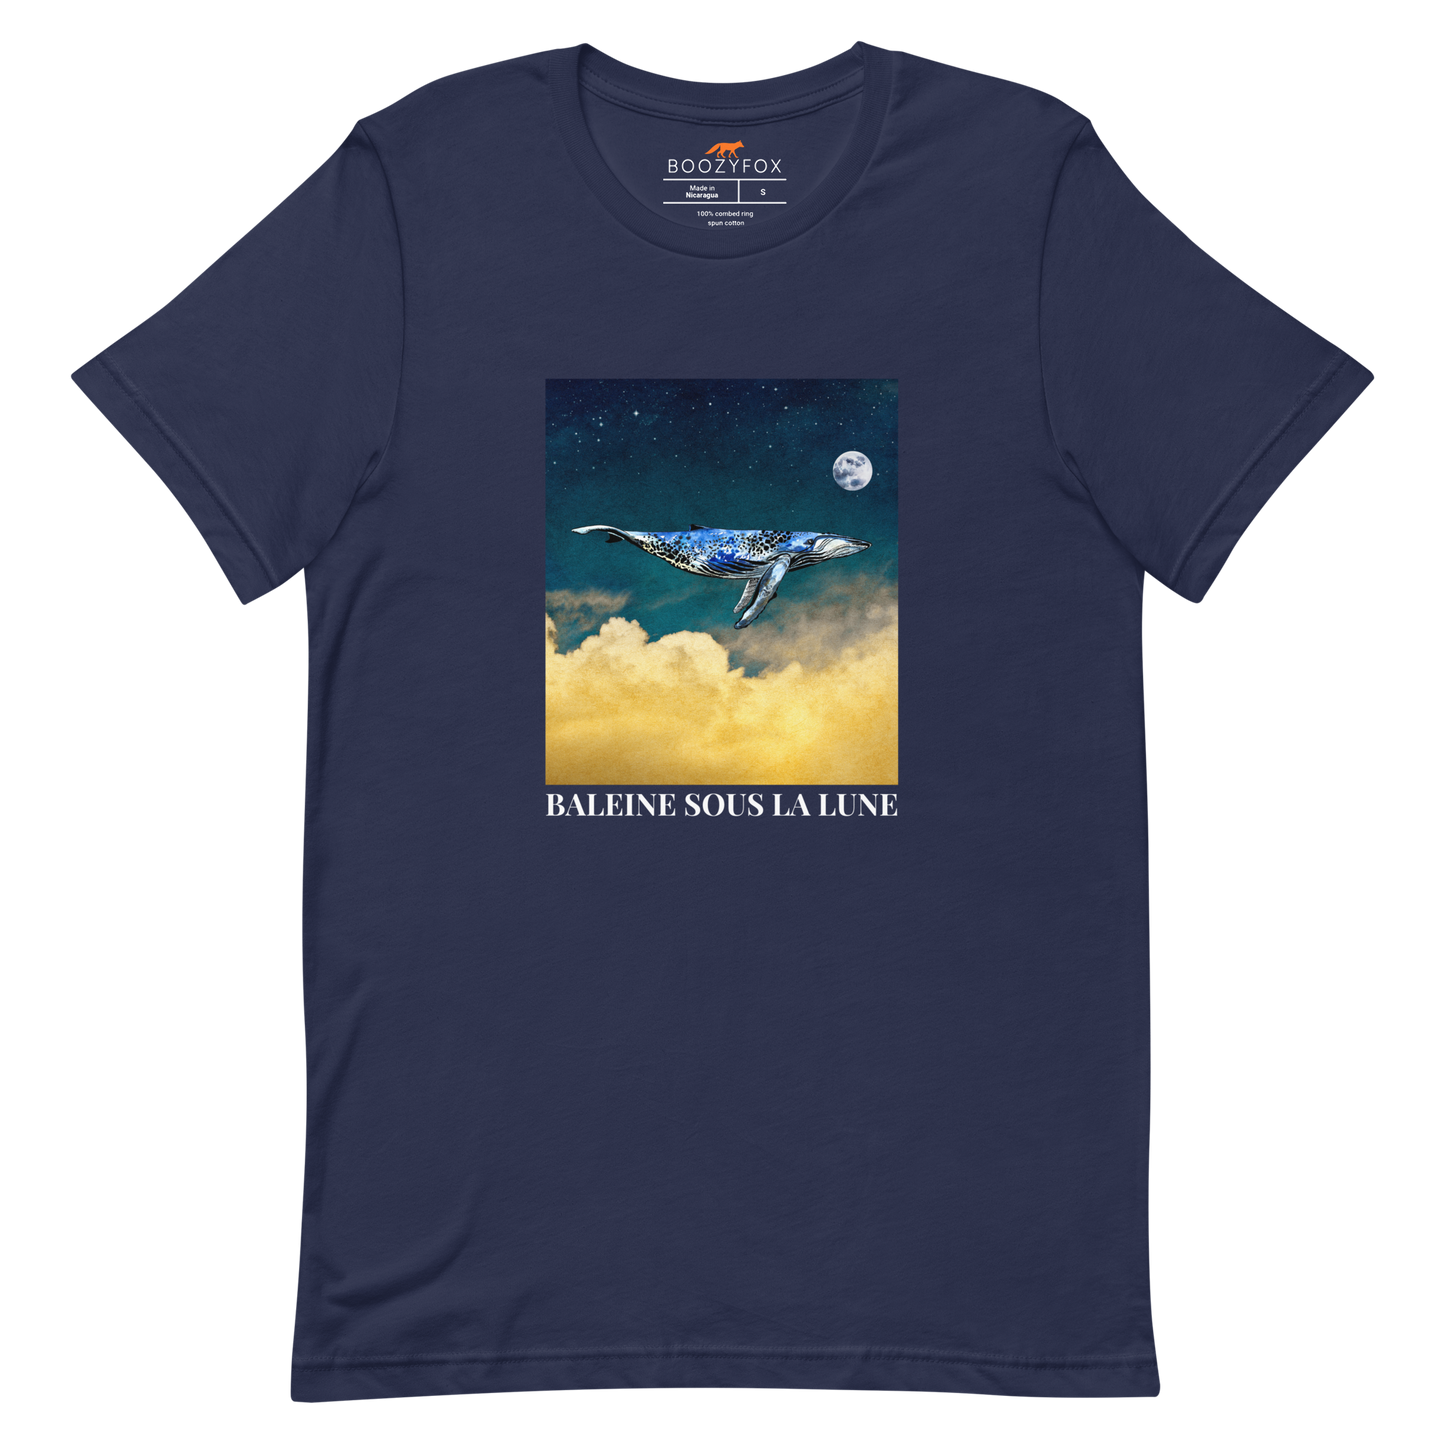 Navy Premium Whale T-Shirt featuring a majestic Whale Under The Moon graphic on the chest - Cool Graphic Whale Tees - Boozy Fox